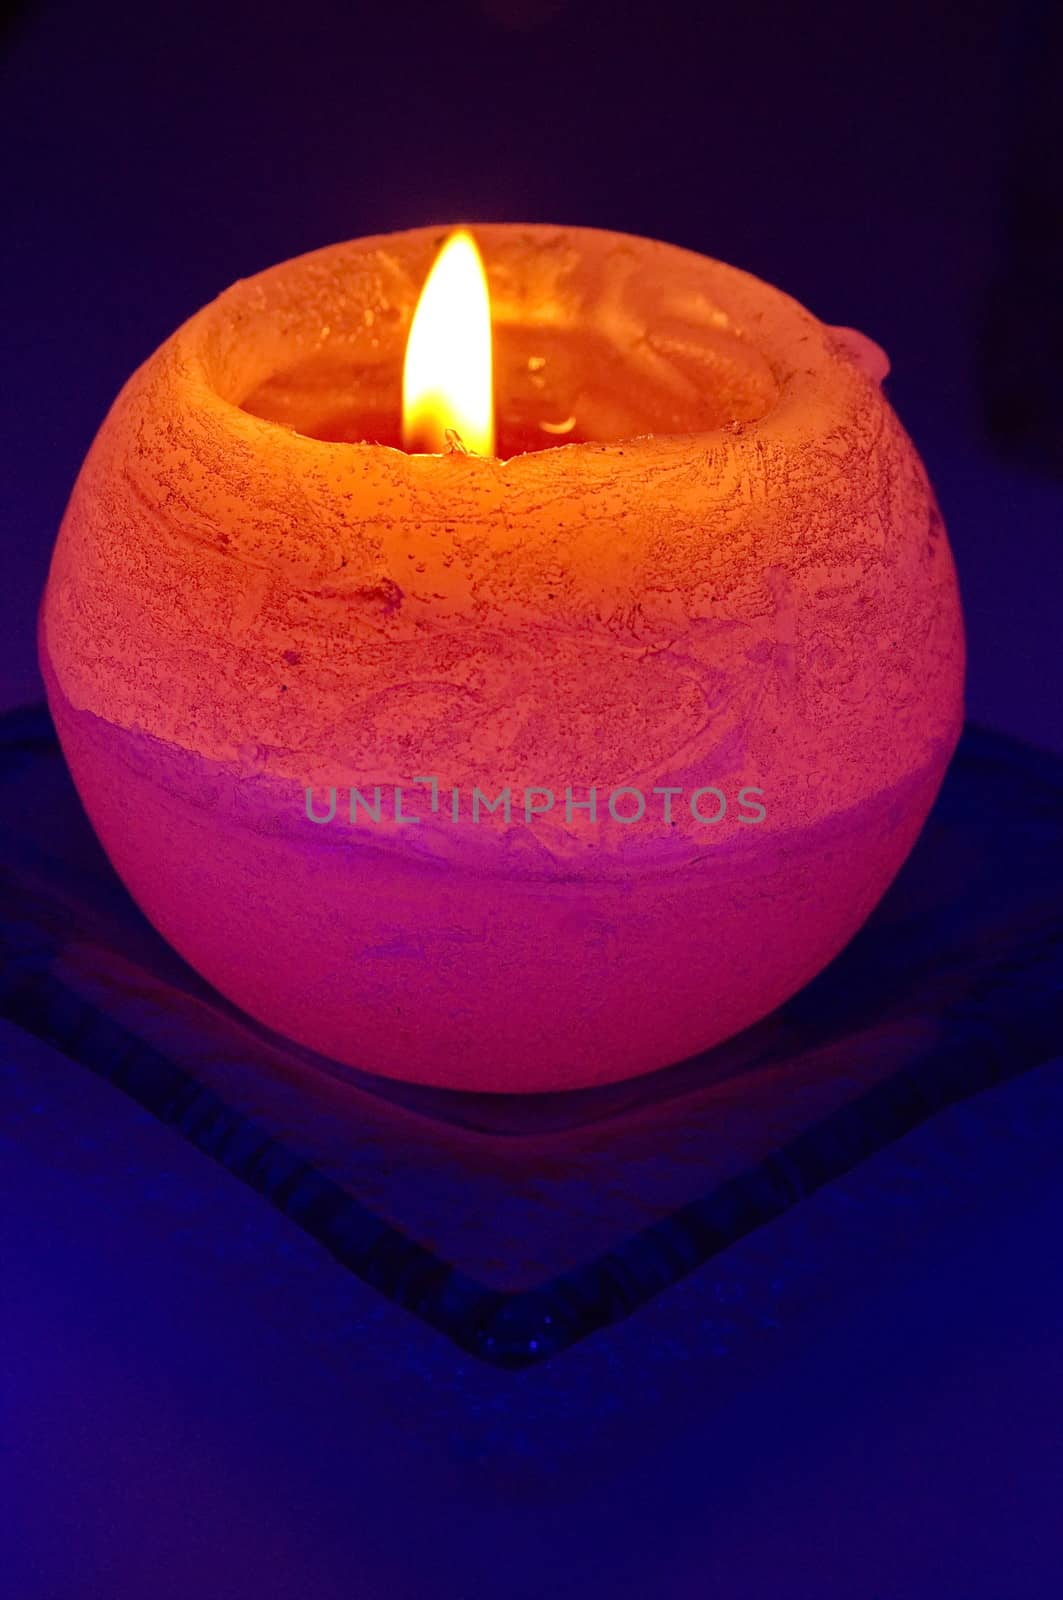 Orange candle on blue background by anderm